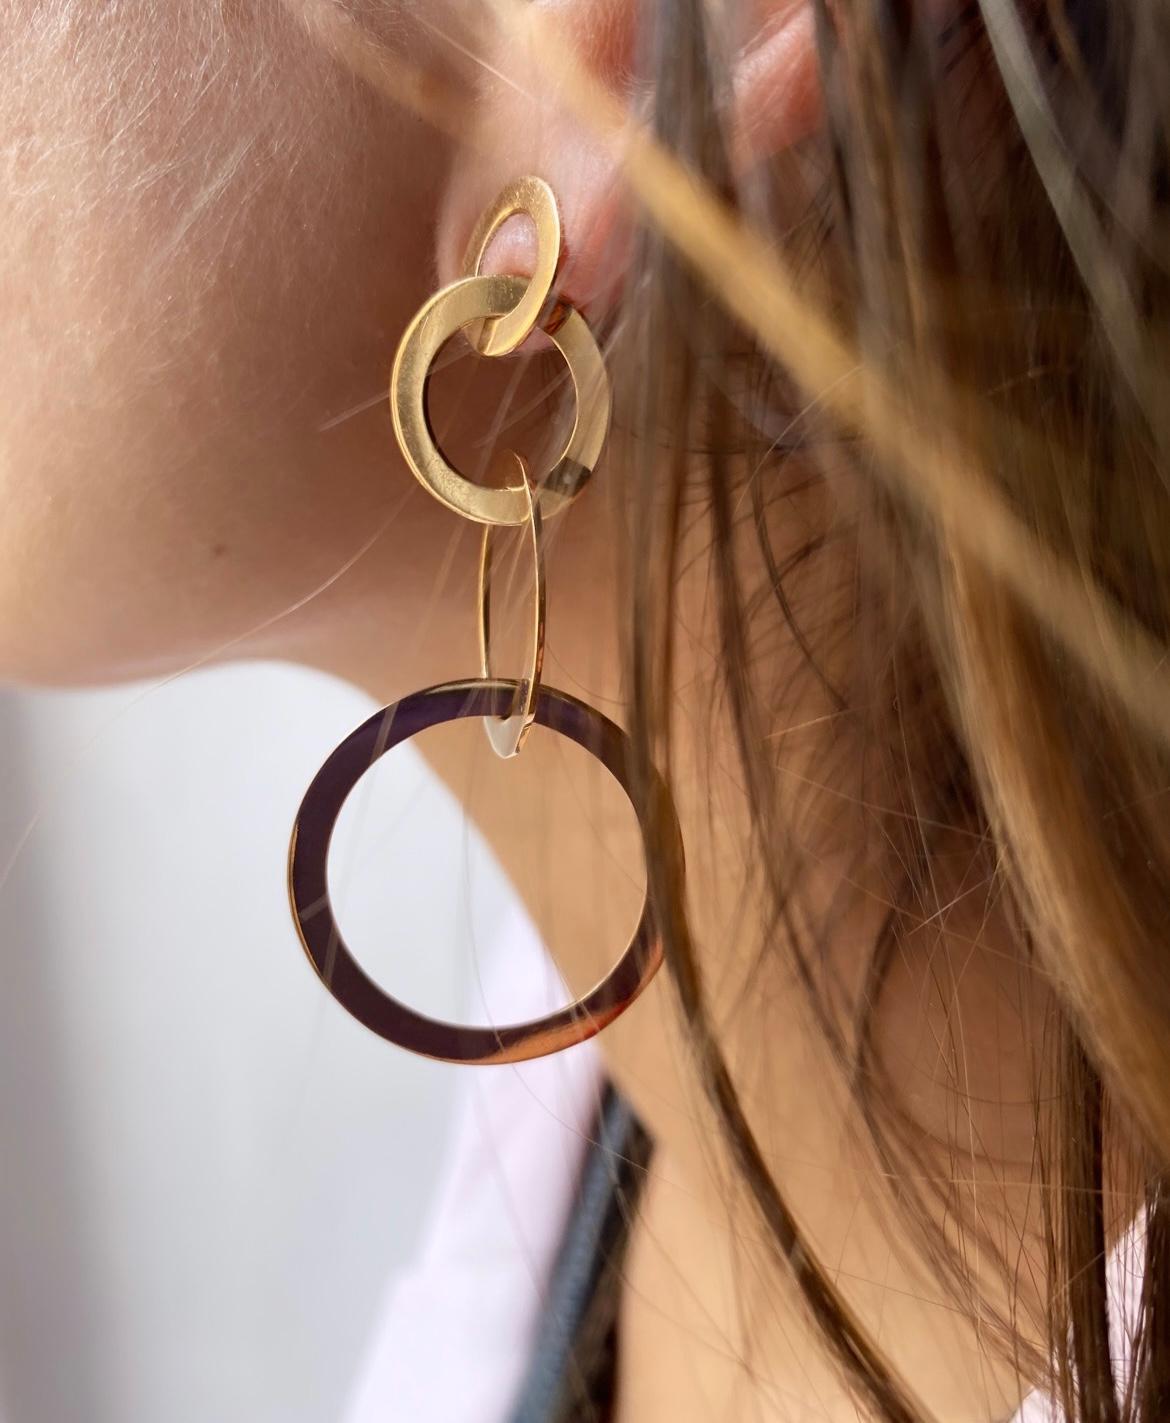 Modern Futuristic 18k Gold Hoop Interlocking Earrings Handcrafted in Italy For Sale